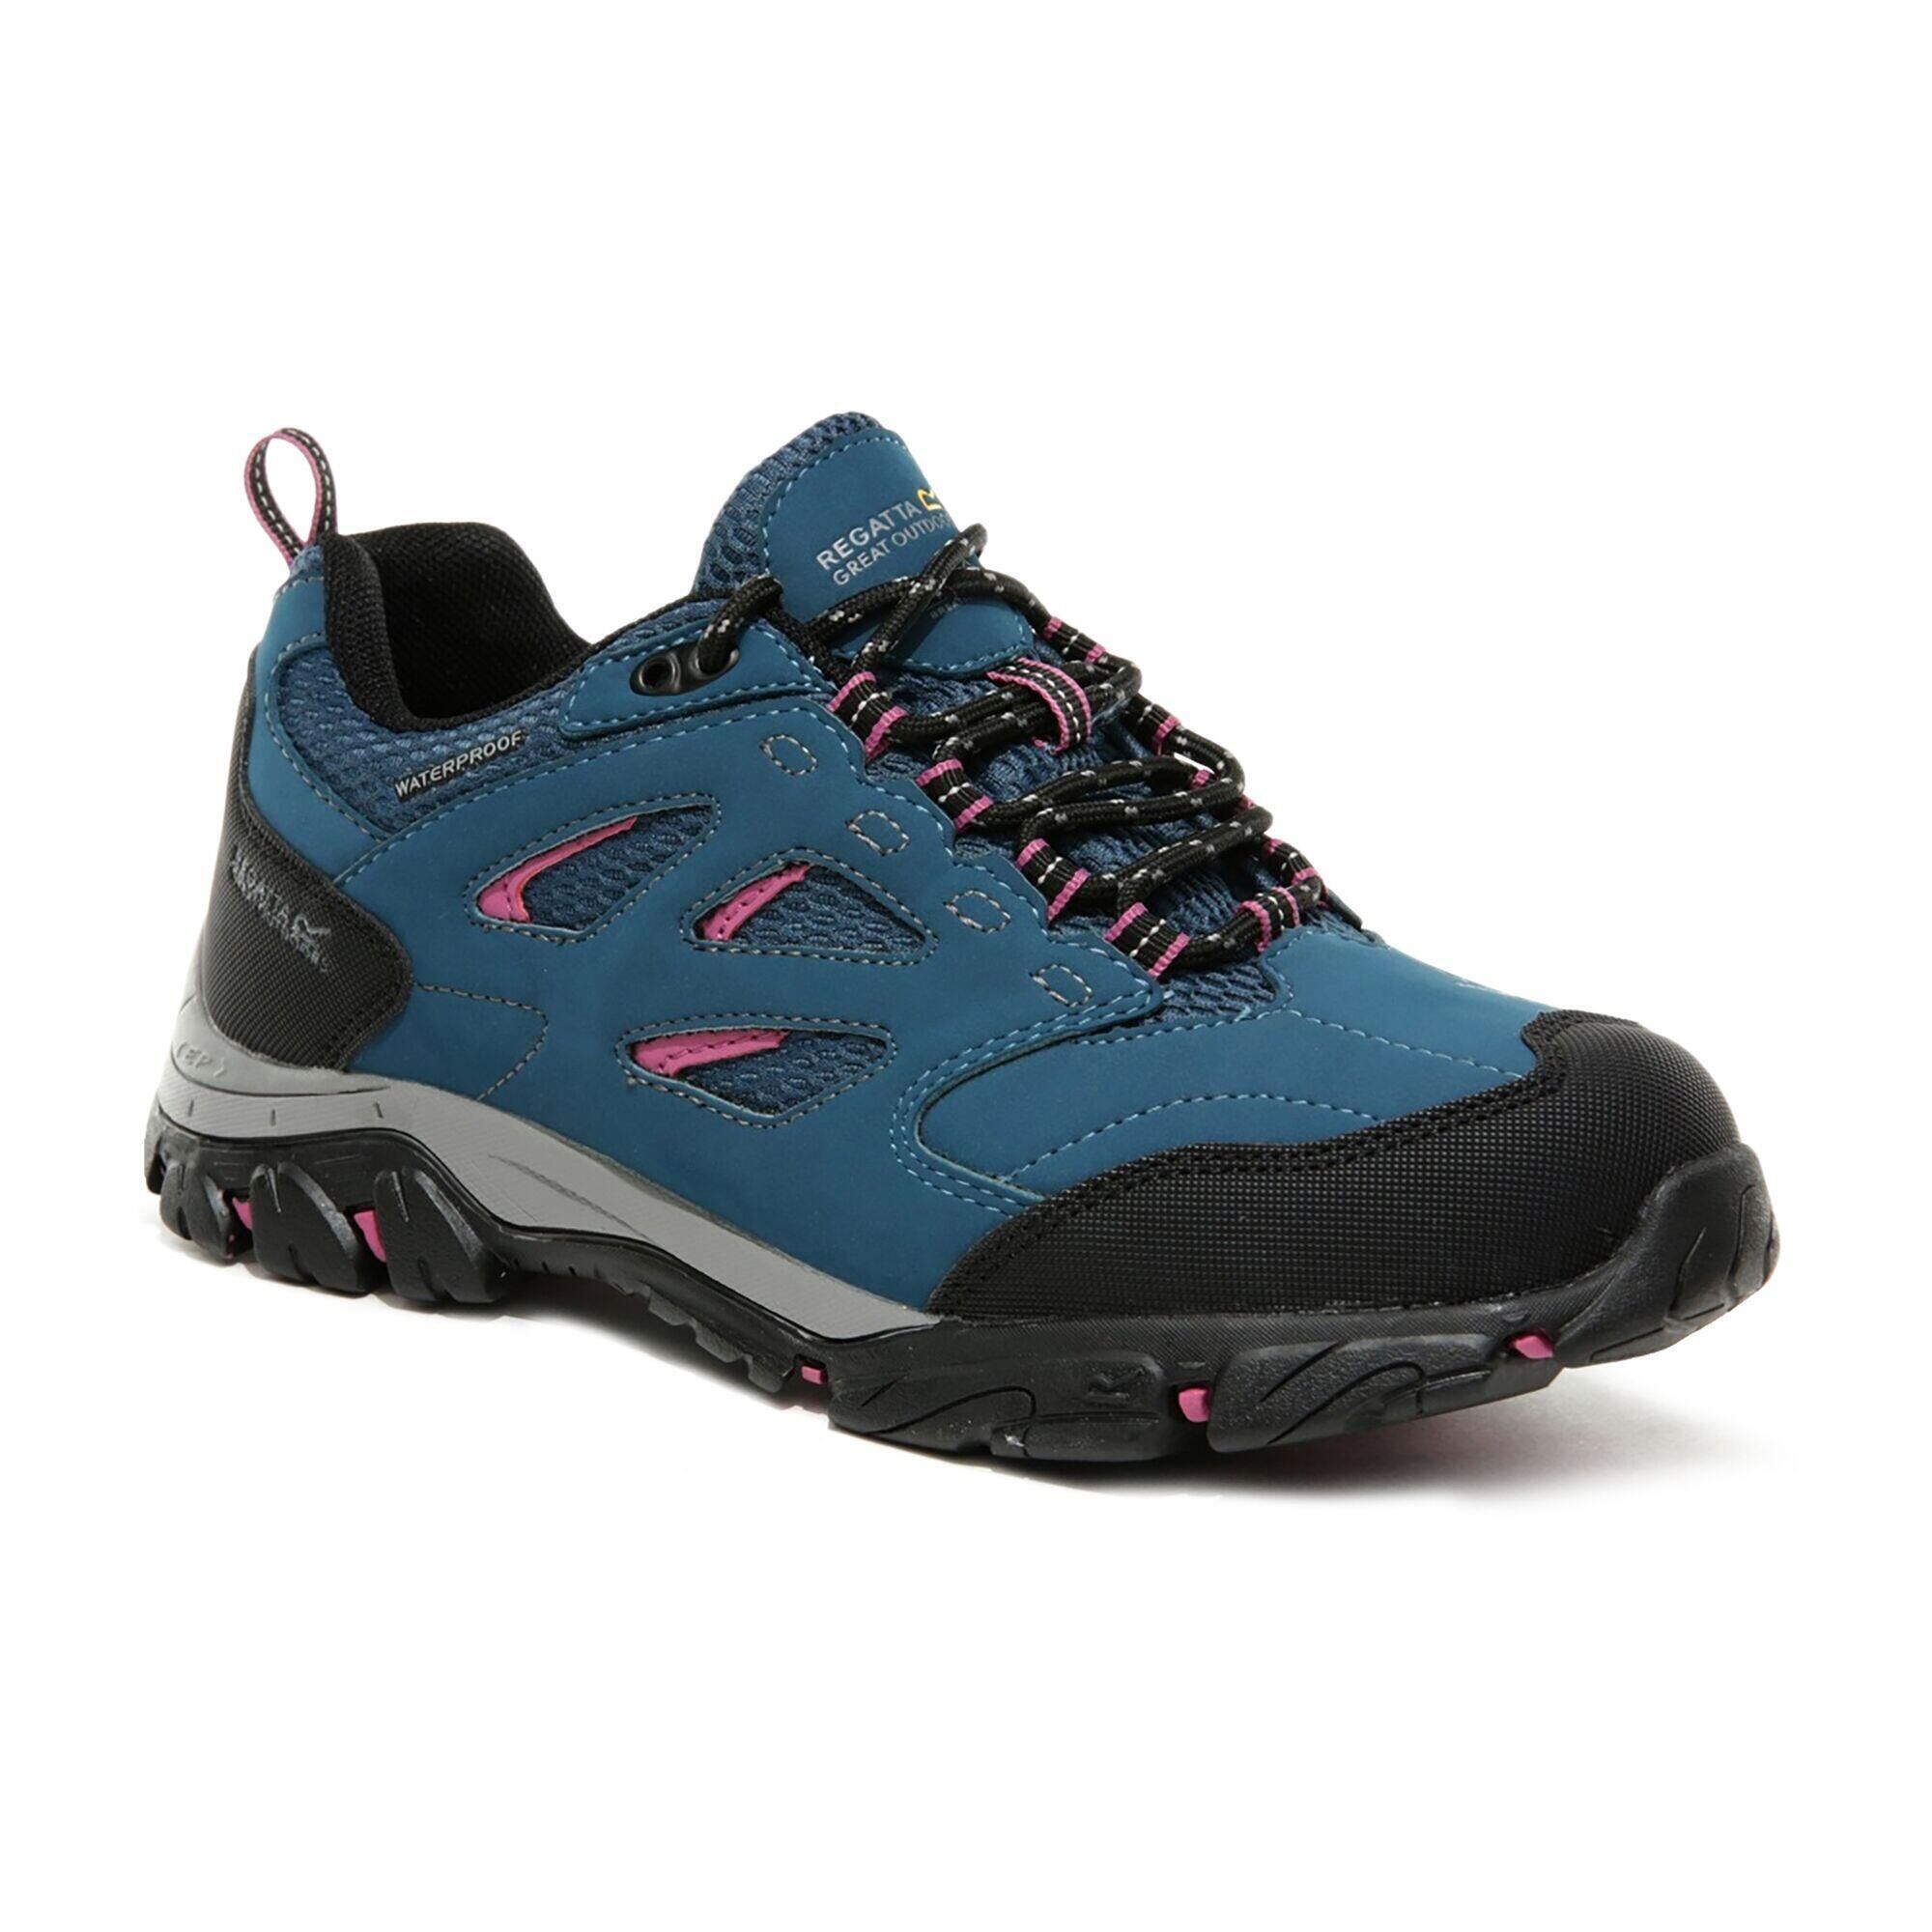 REGATTA Lady Holcombe IEP Low Women's Hiking Boots - Moroccan Blue / Red